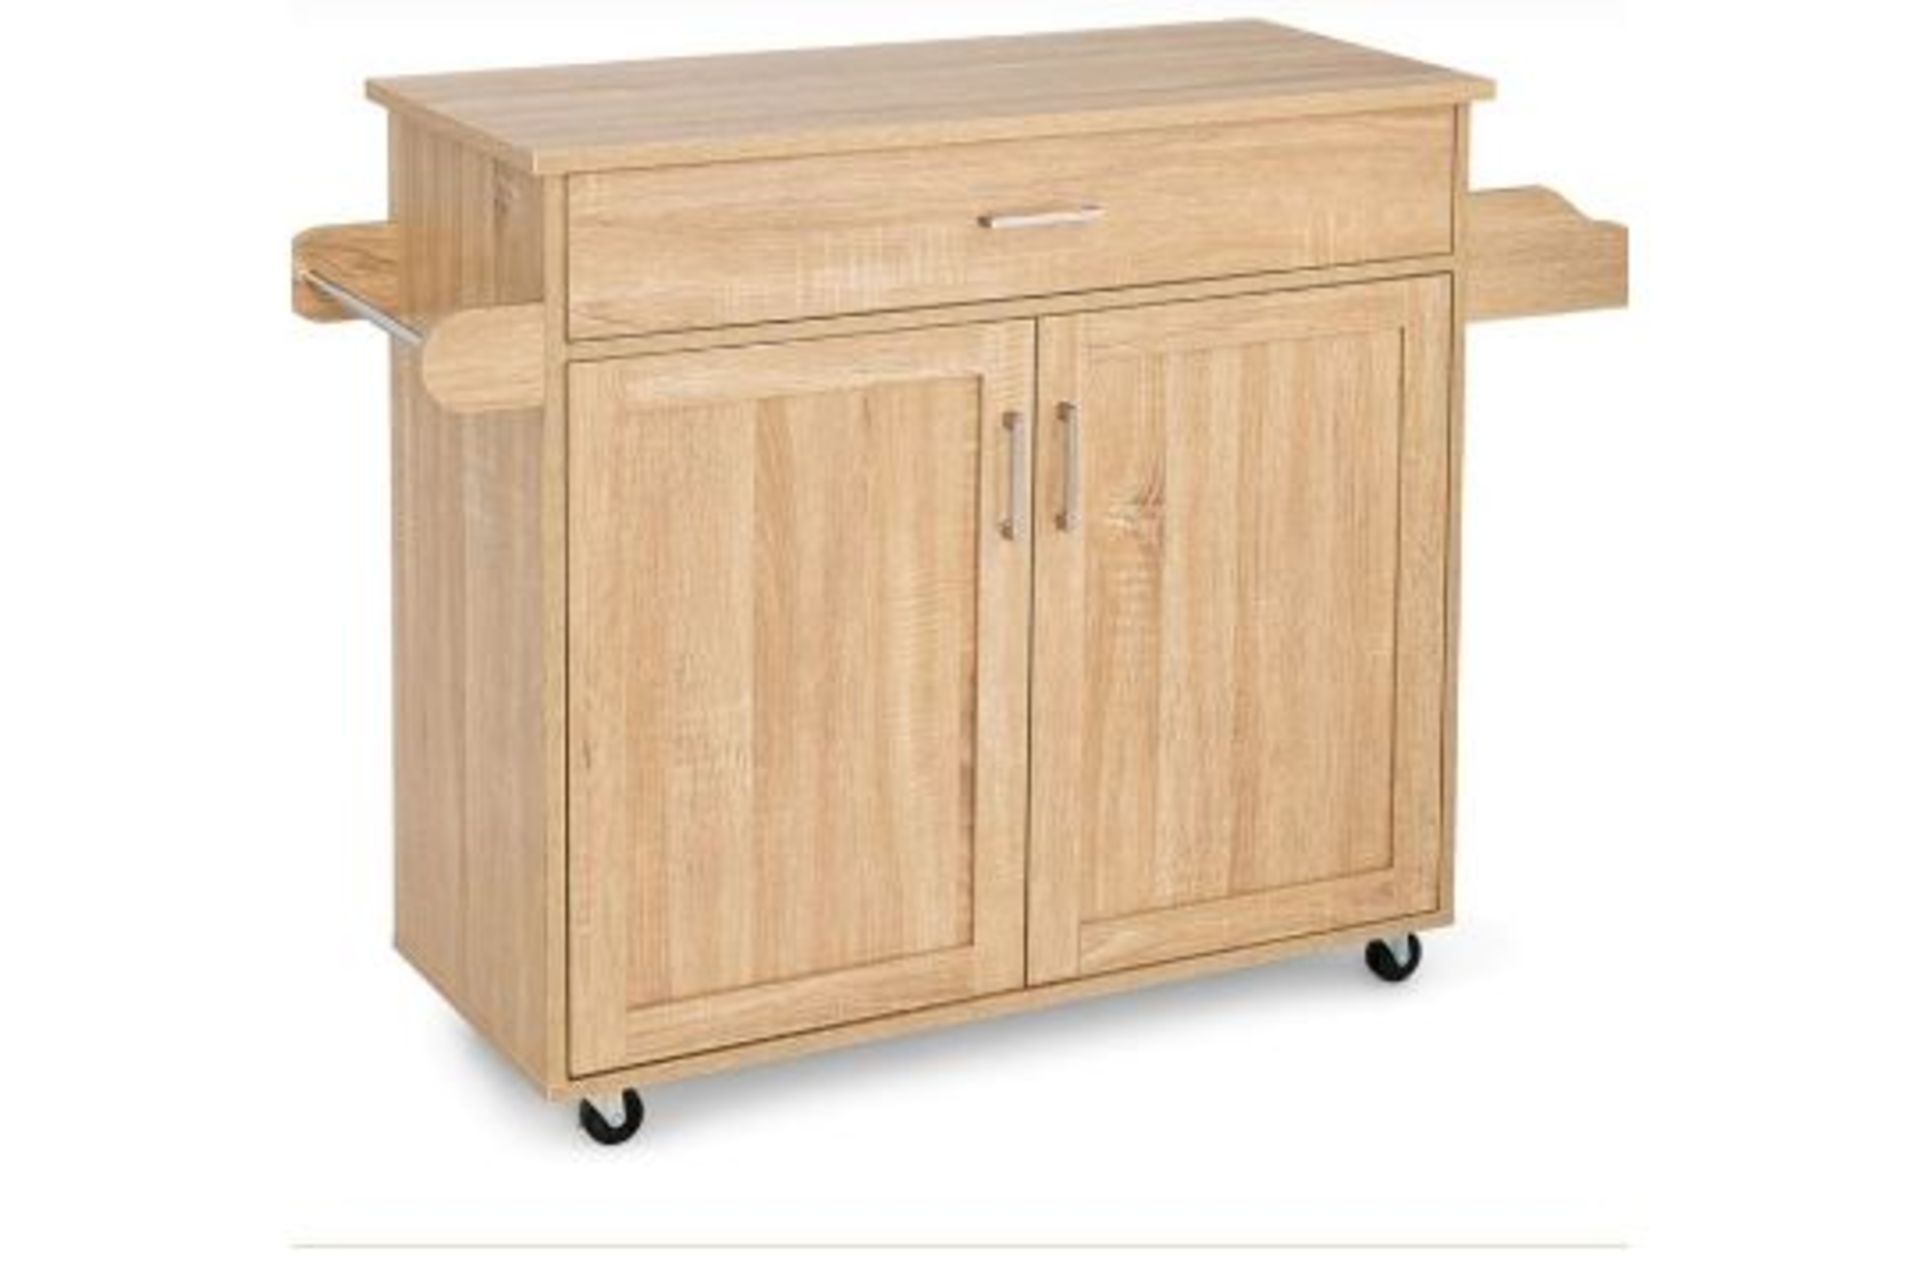 ROLLING KITCHEN STORAGE TROLLEY WITH ADJUSTABLE SHELF AND DRAWER-NATURAL. - R14.3. This kitchen